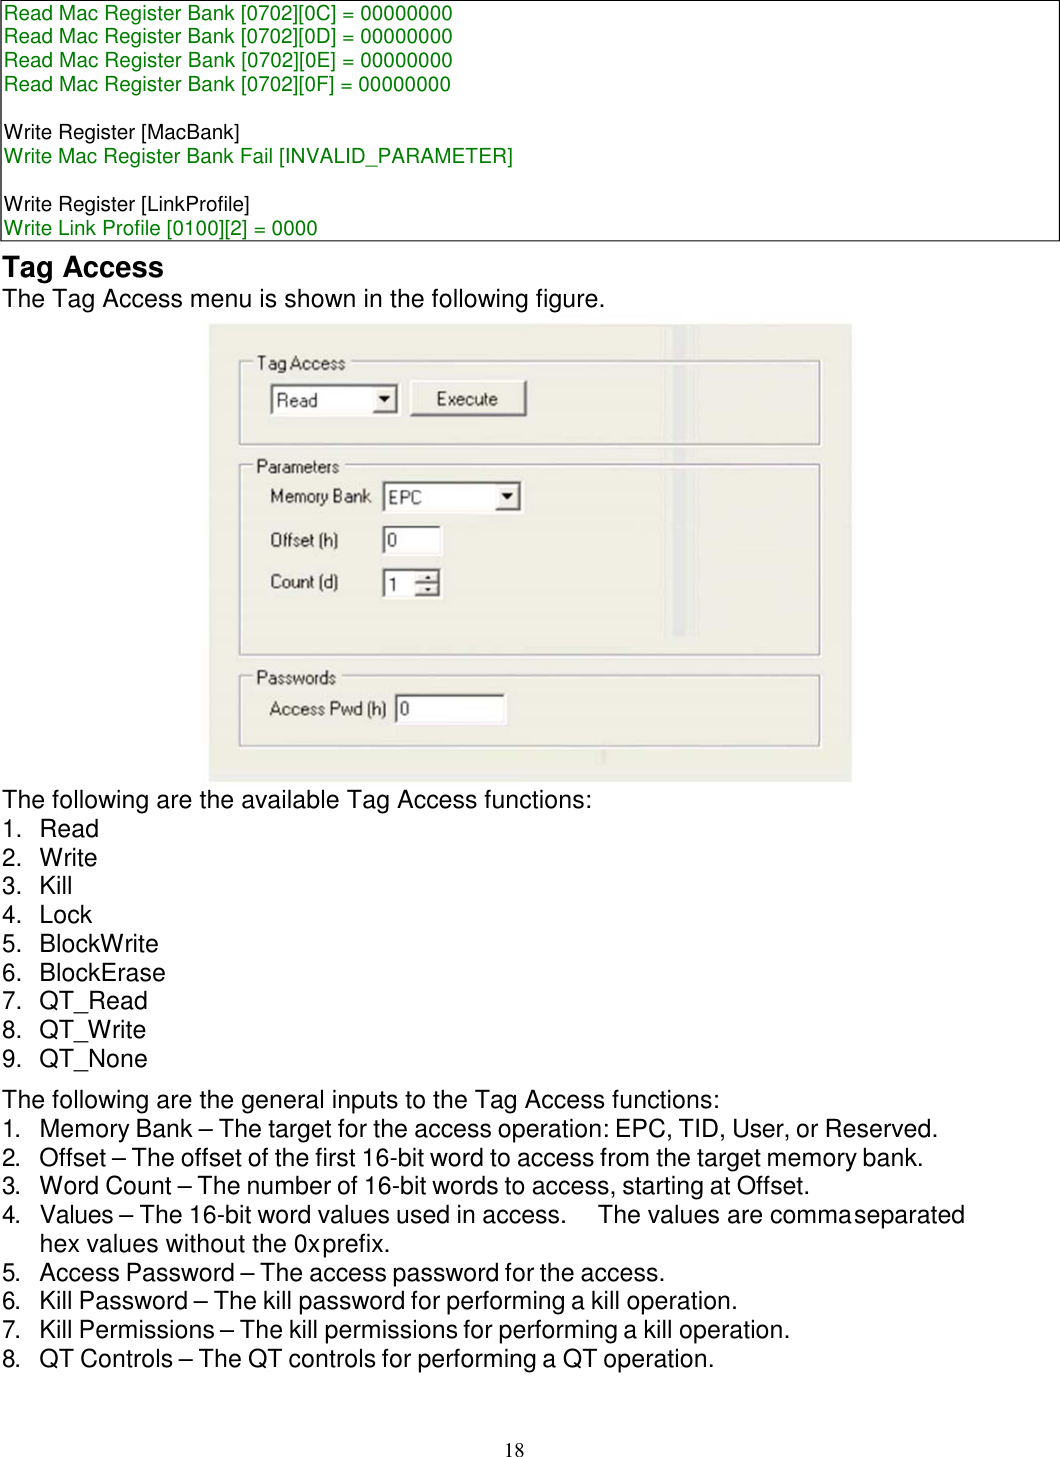 18    Tag Access The Tag Access menu is shown in the following figure.  The following are the available Tag Access functions: 1. Read 2. Write 3. Kill 4. Lock 5. BlockWrite 6. BlockErase 7. QT_Read 8. QT_Write 9. QT_None The following are the general inputs to the Tag Access functions: 1. Memory Bank – The target for the access operation: EPC, TID, User, or Reserved. 2. Offset – The offset of the first 16-bit word to access from the target memory bank. 3. Word Count – The number of 16-bit words to access, starting at Offset. 4. Values – The 16-bit word values used in access.  The values are comma separated hex values without the 0x prefix. 5. Access Password – The access password for the access. 6. Kill Password – The kill password for performing a kill operation. 7. Kill Permissions – The kill permissions for performing a kill operation. 8. QT Controls – The QT controls for performing a QT operation. Read Mac Register Bank [0702][0C] = 00000000 Read Mac Register Bank [0702][0D] = 00000000 Read Mac Register Bank [0702][0E] = 00000000 Read Mac Register Bank [0702][0F] = 00000000  Write Register [MacBank] Write Mac Register Bank Fail [INVALID_PARAMETER]  Write Register [LinkProfile] Write Link Profile [0100][2] = 0000 